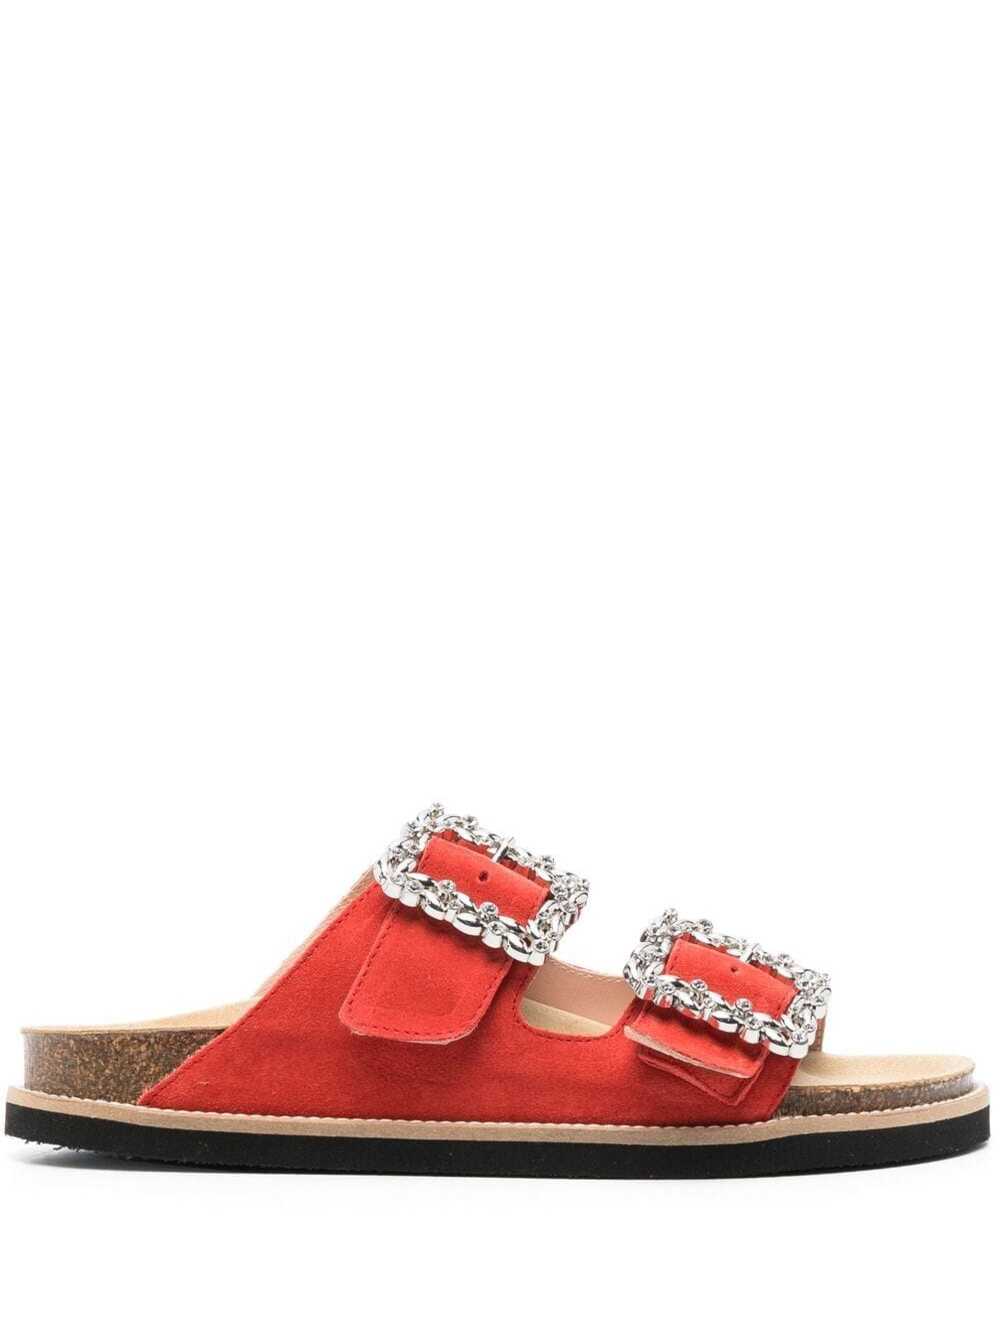 POLLINI SLIDES WITH CRYSTAL BUCKLE IN RED LEATHER WOMAN